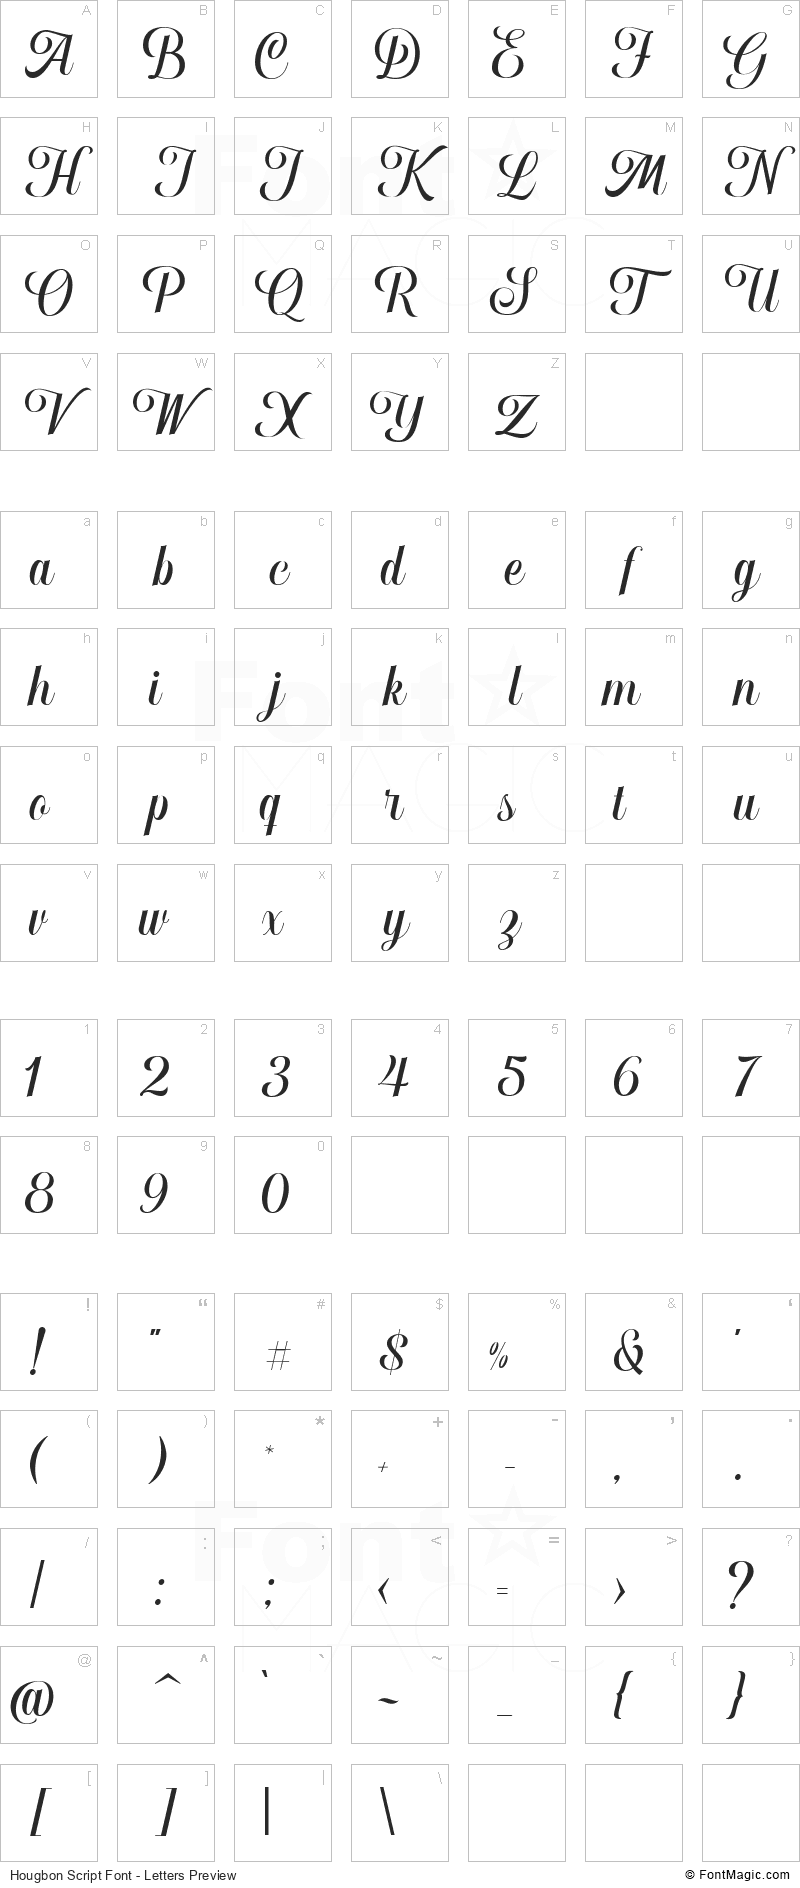 Hougbon Script Font - All Latters Preview Chart